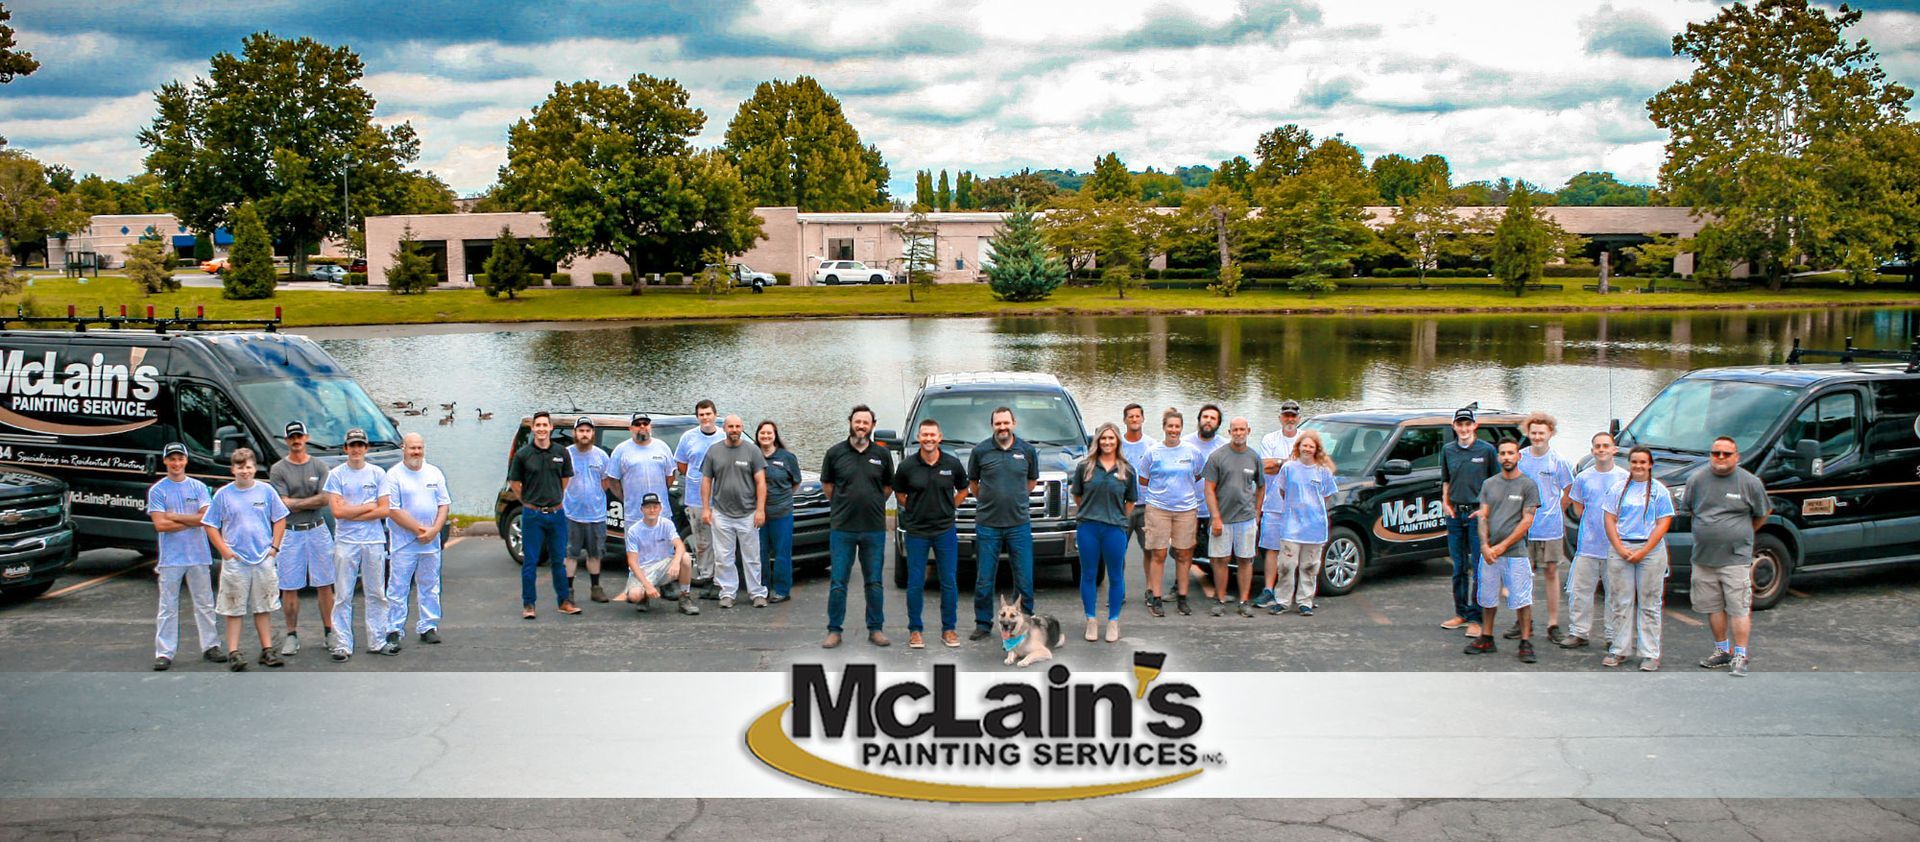 McLains Painting Services team photo Knoxville Tennessee